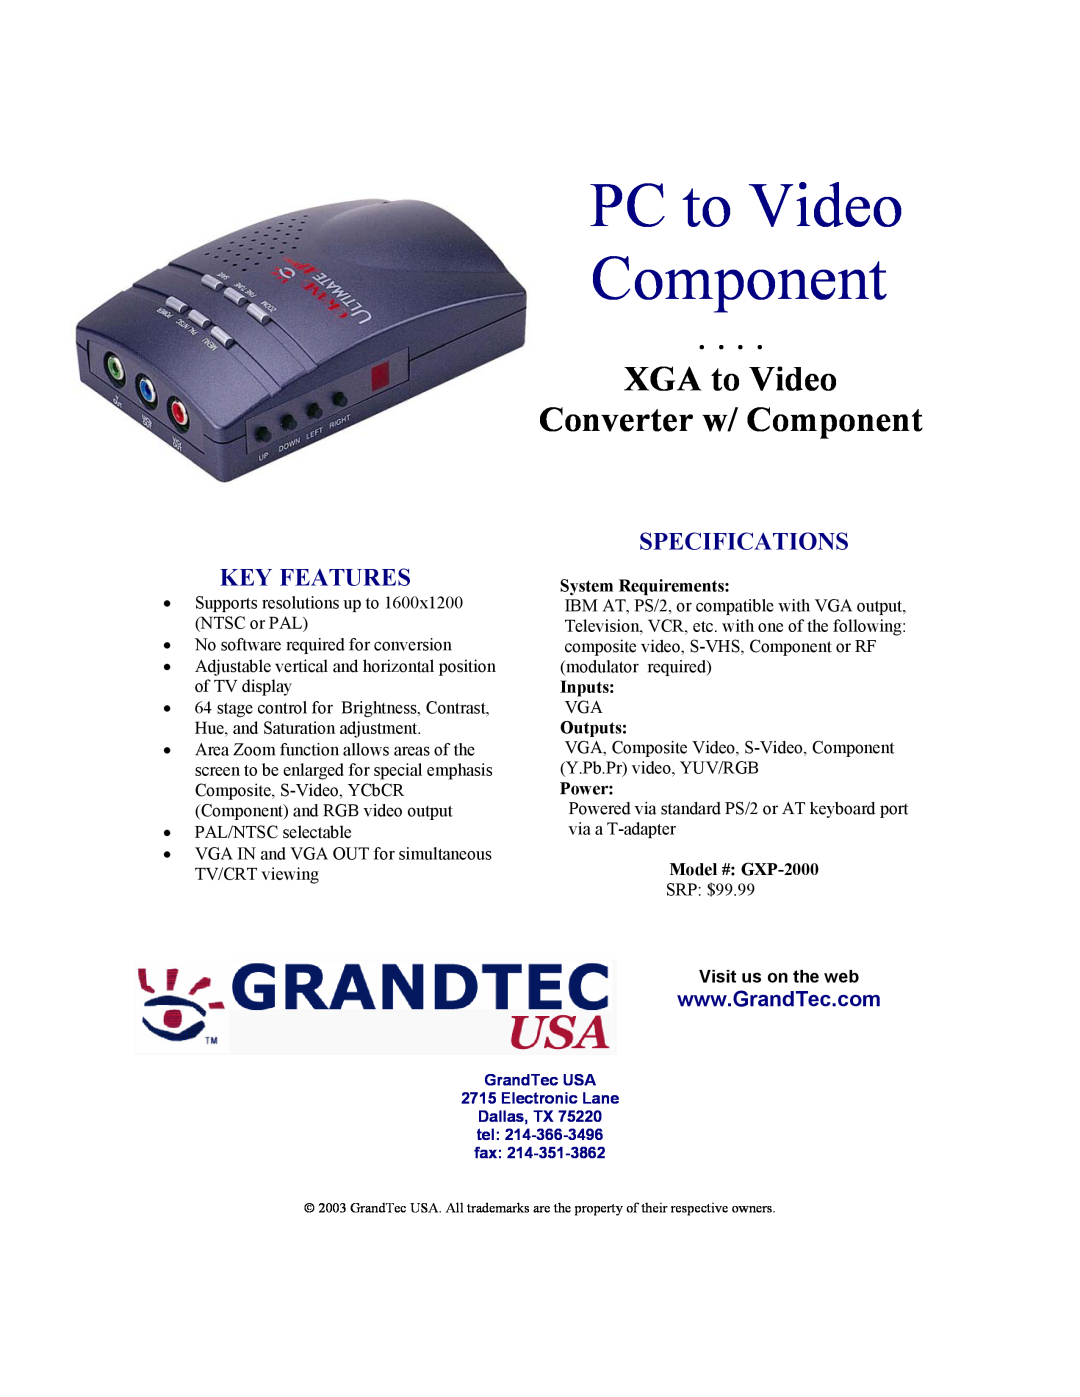 GrandTec GXP-2000 specifications PC to Video Component, XGA to Video Converter w/ Component, Key Features, Specifications 